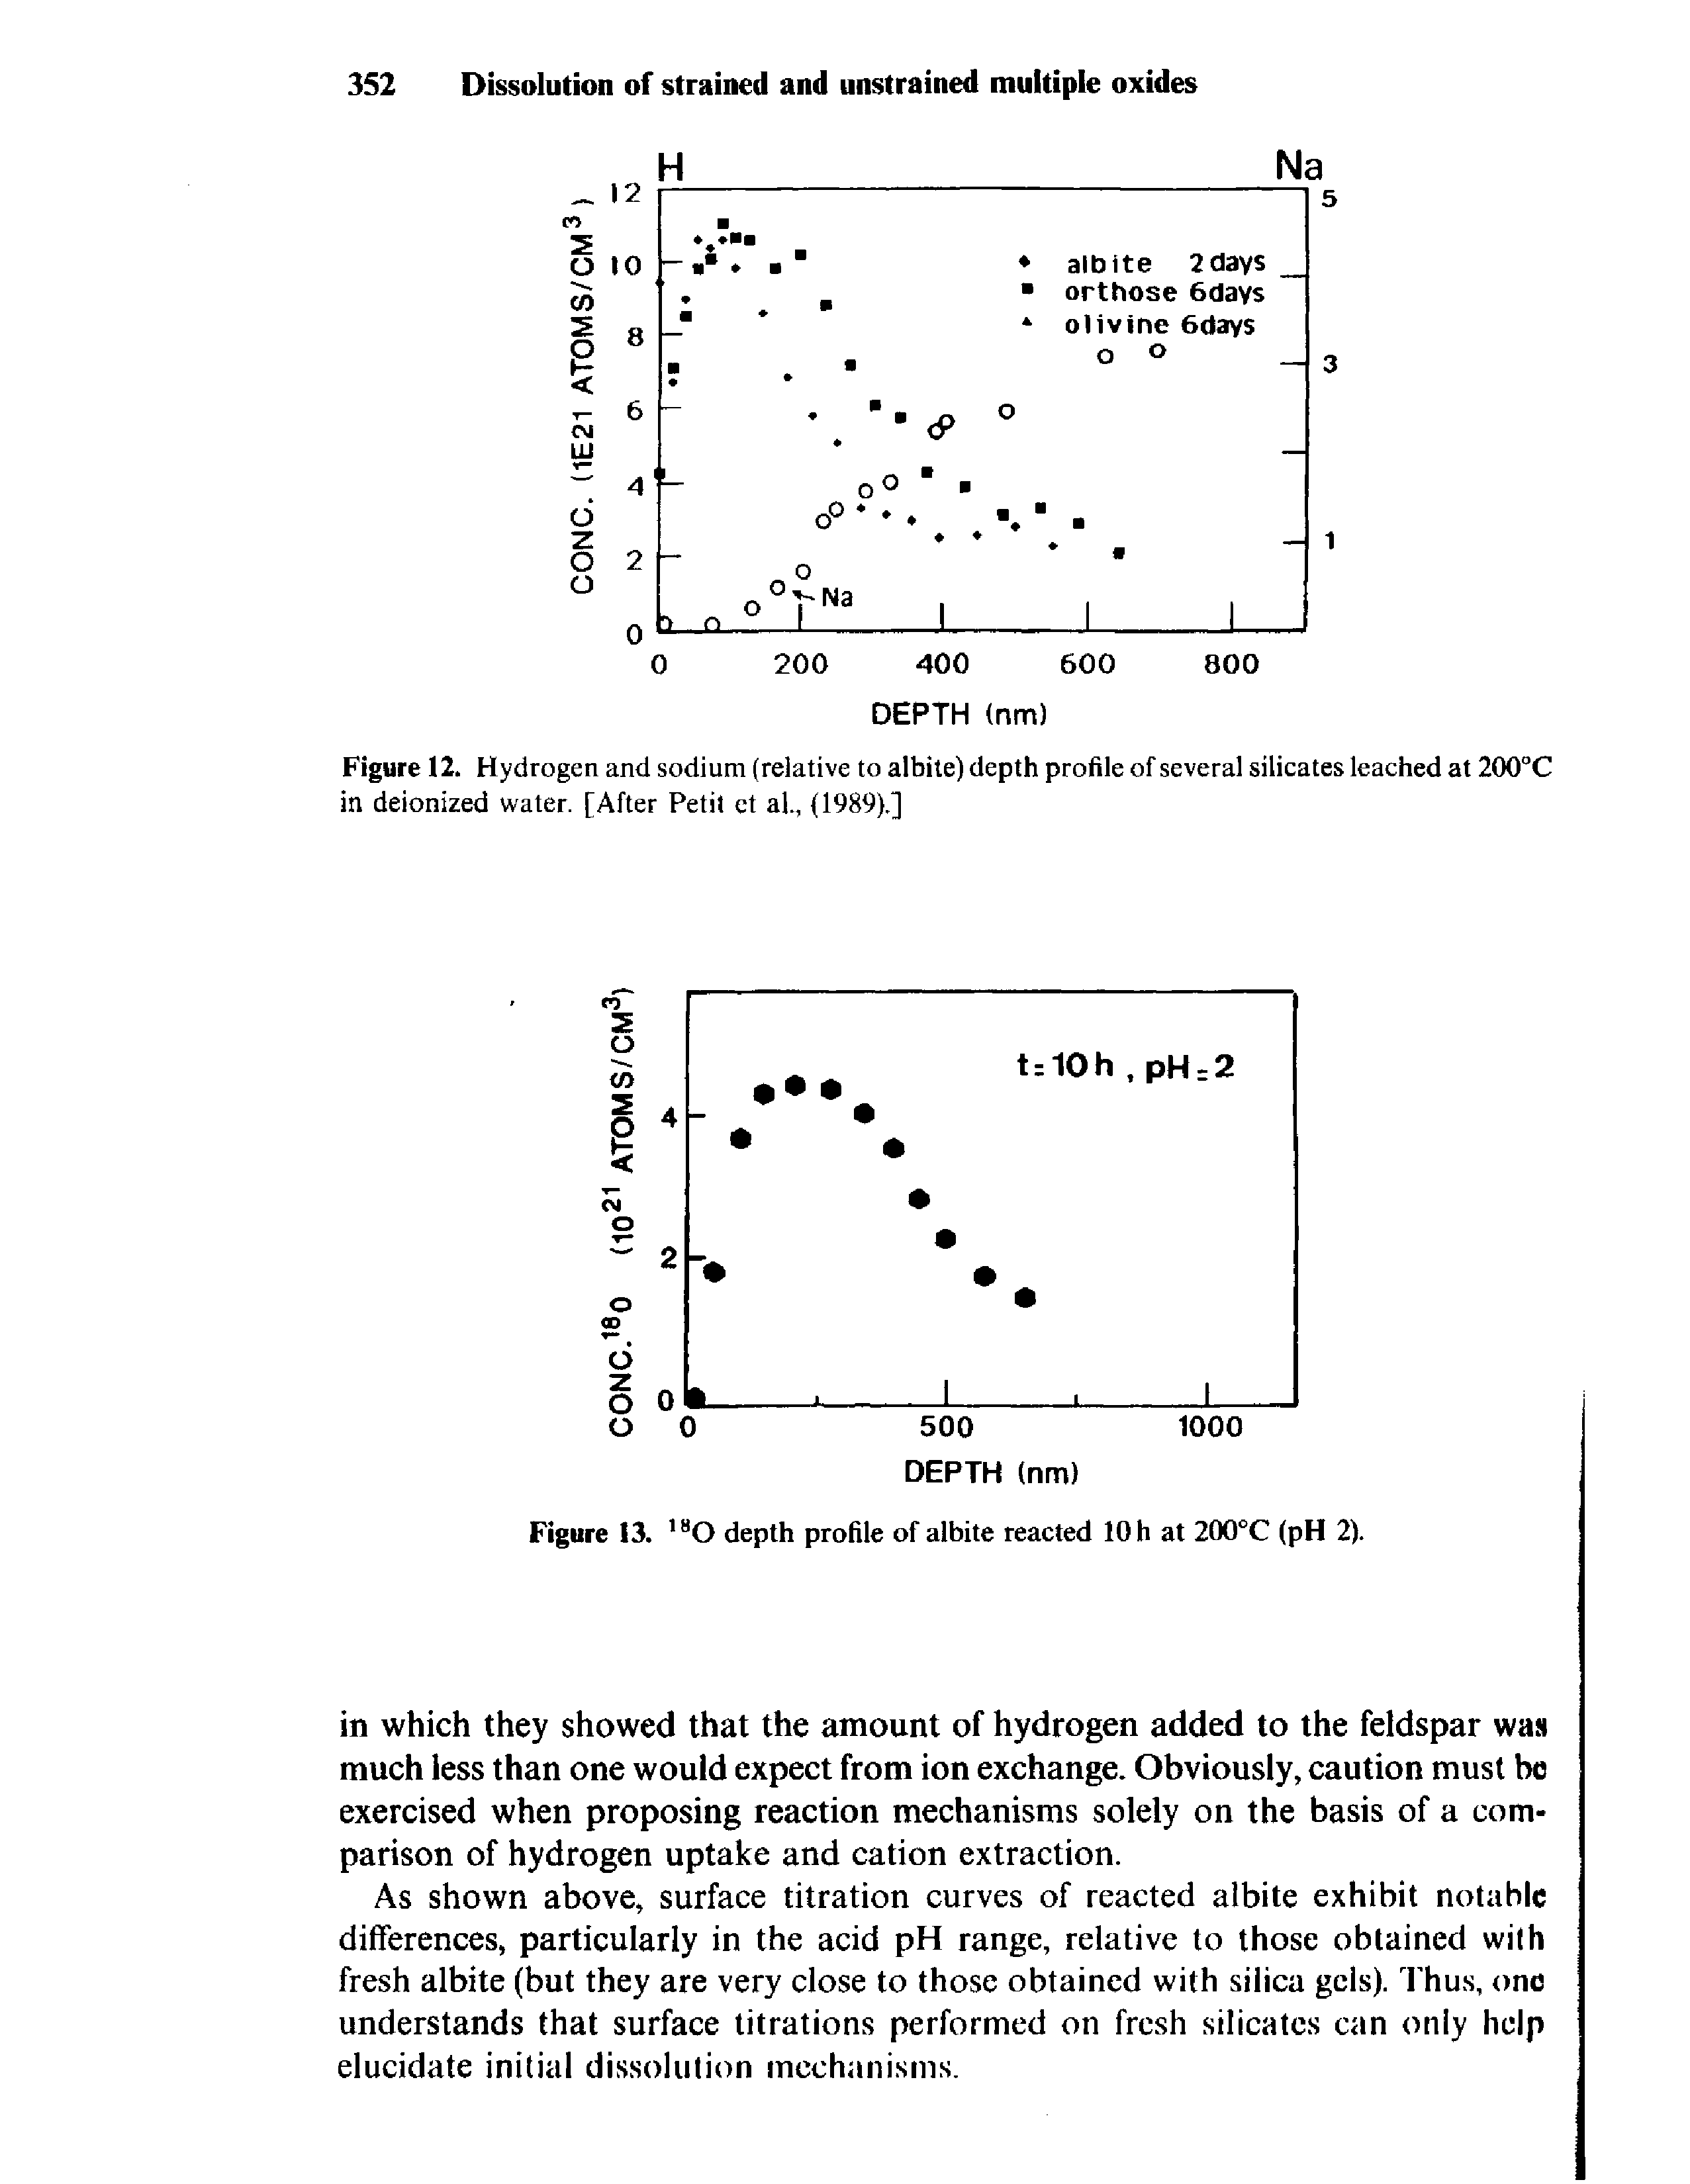 Figure 12. Hydrogen and sodium (relative to albite) depth profile of several silicates leached at 200°C in deionized water. [After Petit et al., (1989).]...